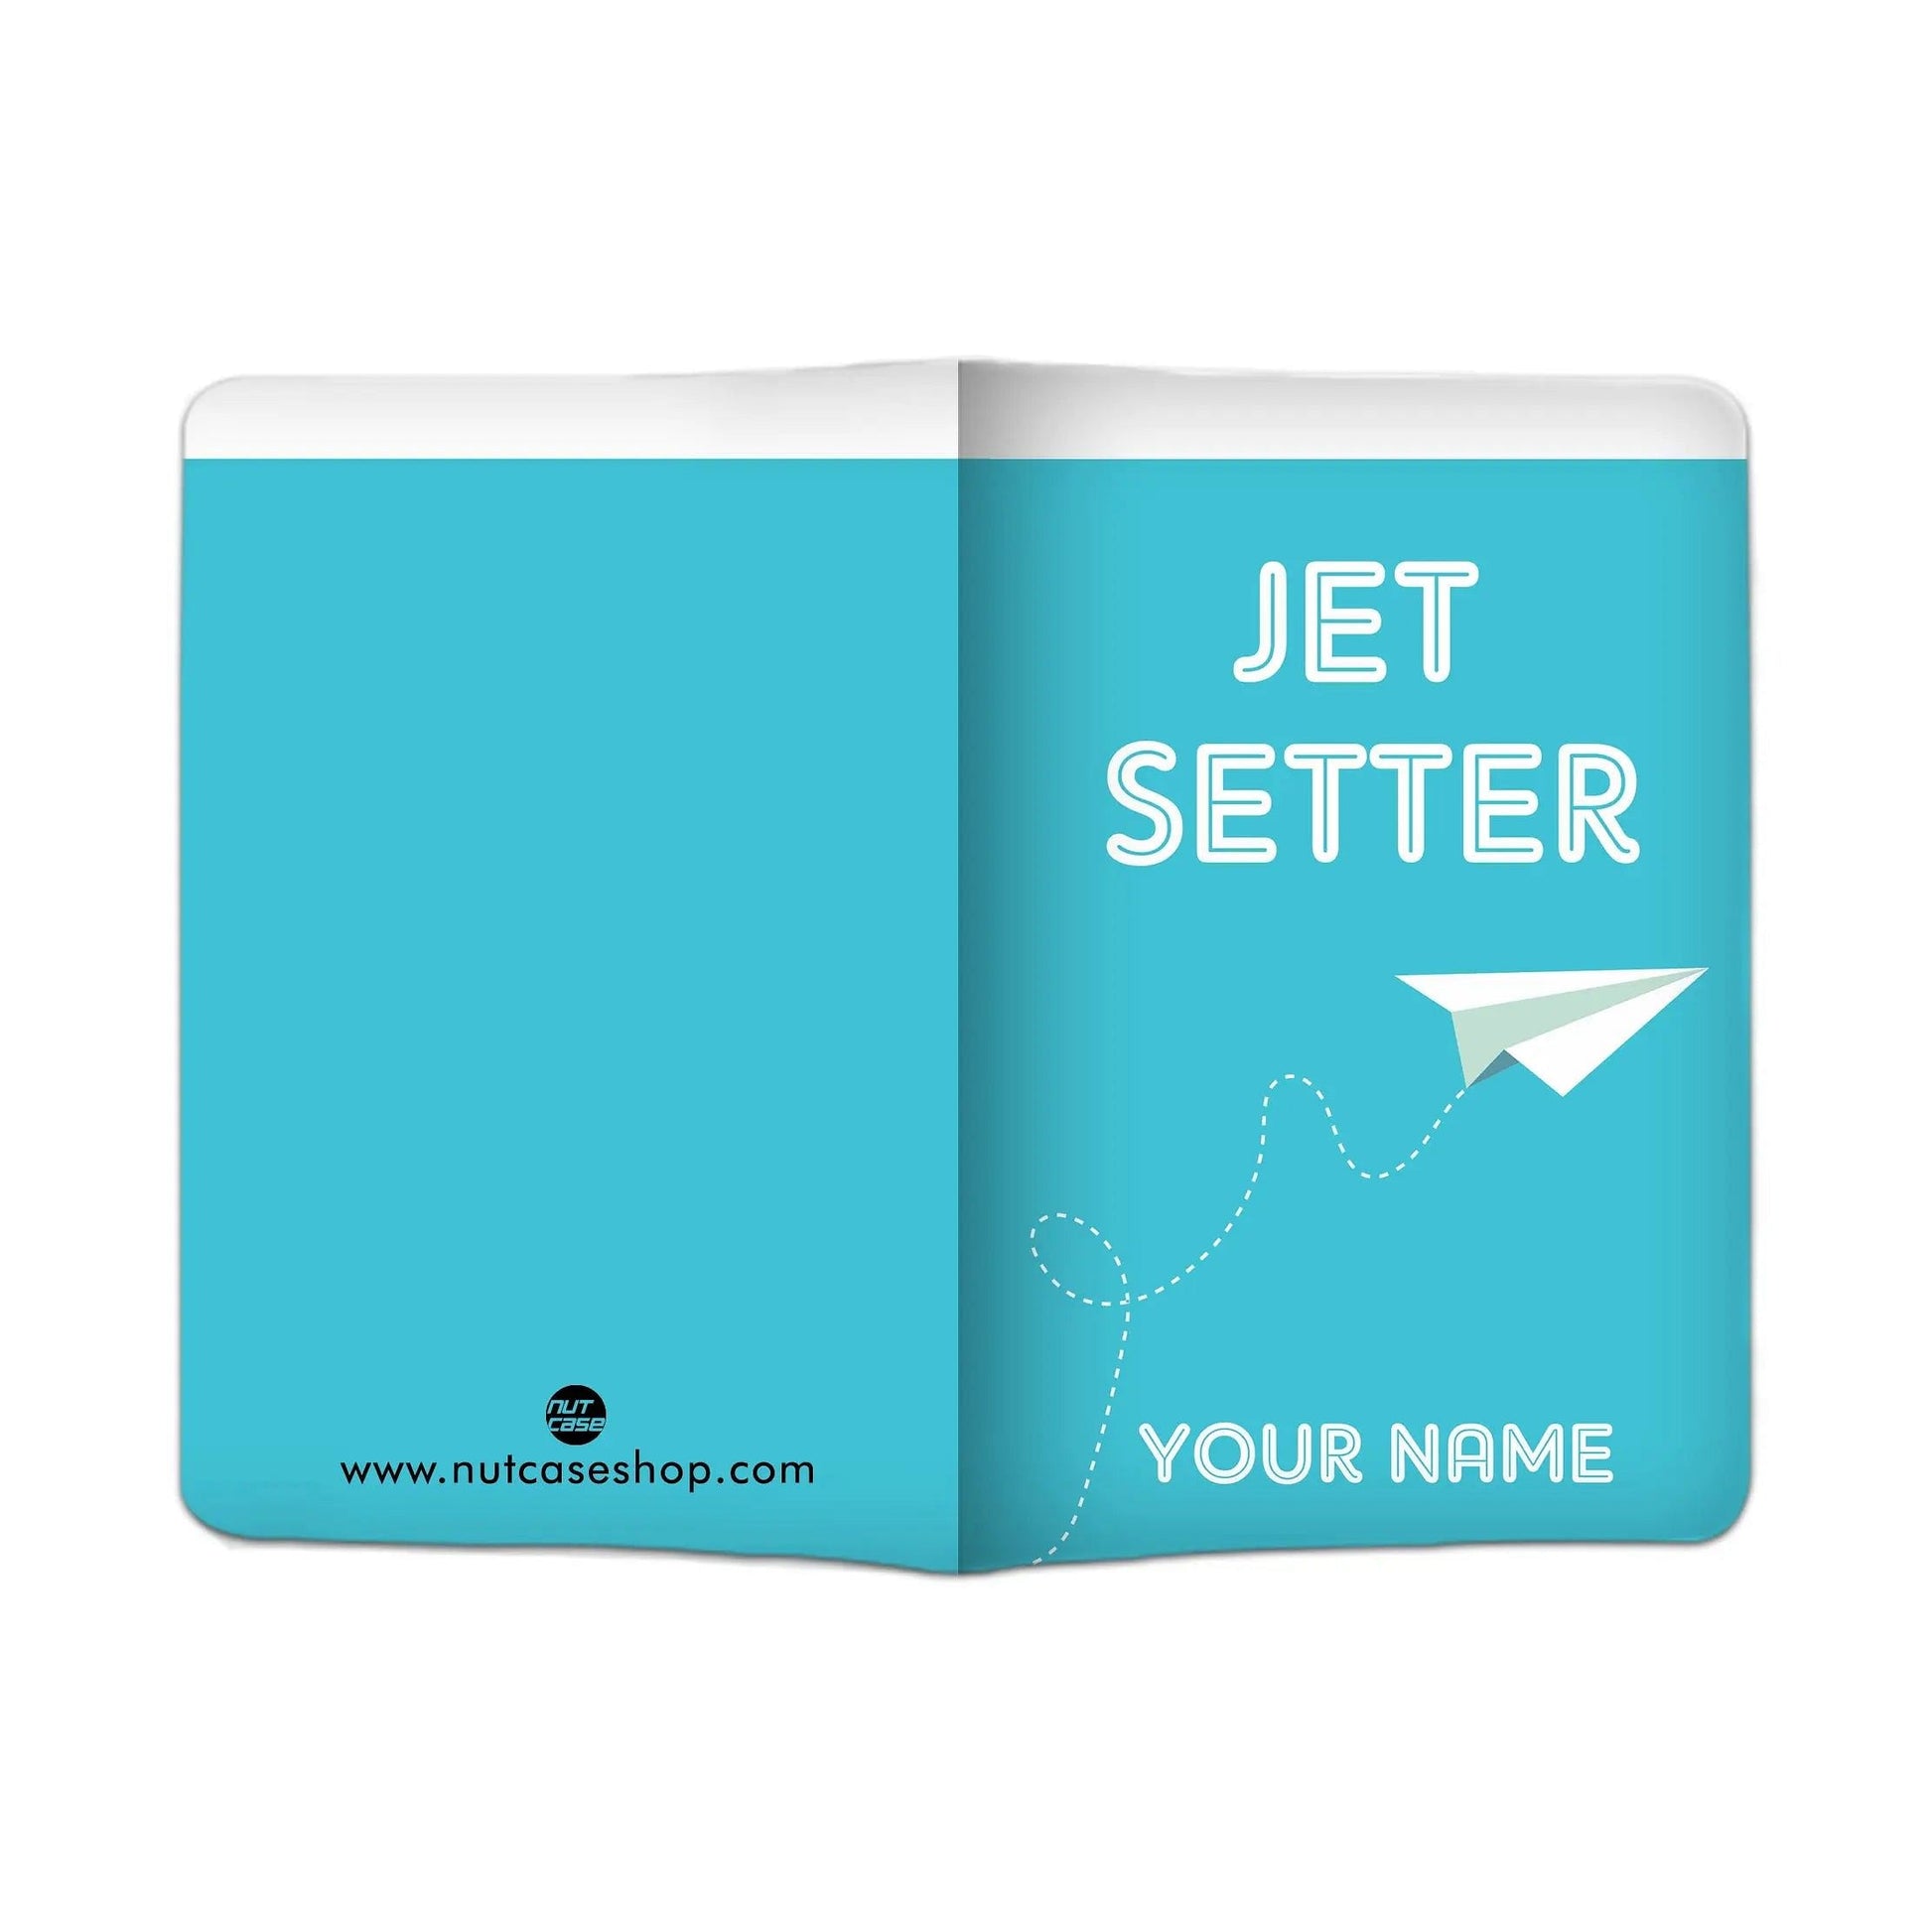 Modern Personalized Passport Cover -  OH THE PLACES I'VE BEEN - Jet Setter Nutcase